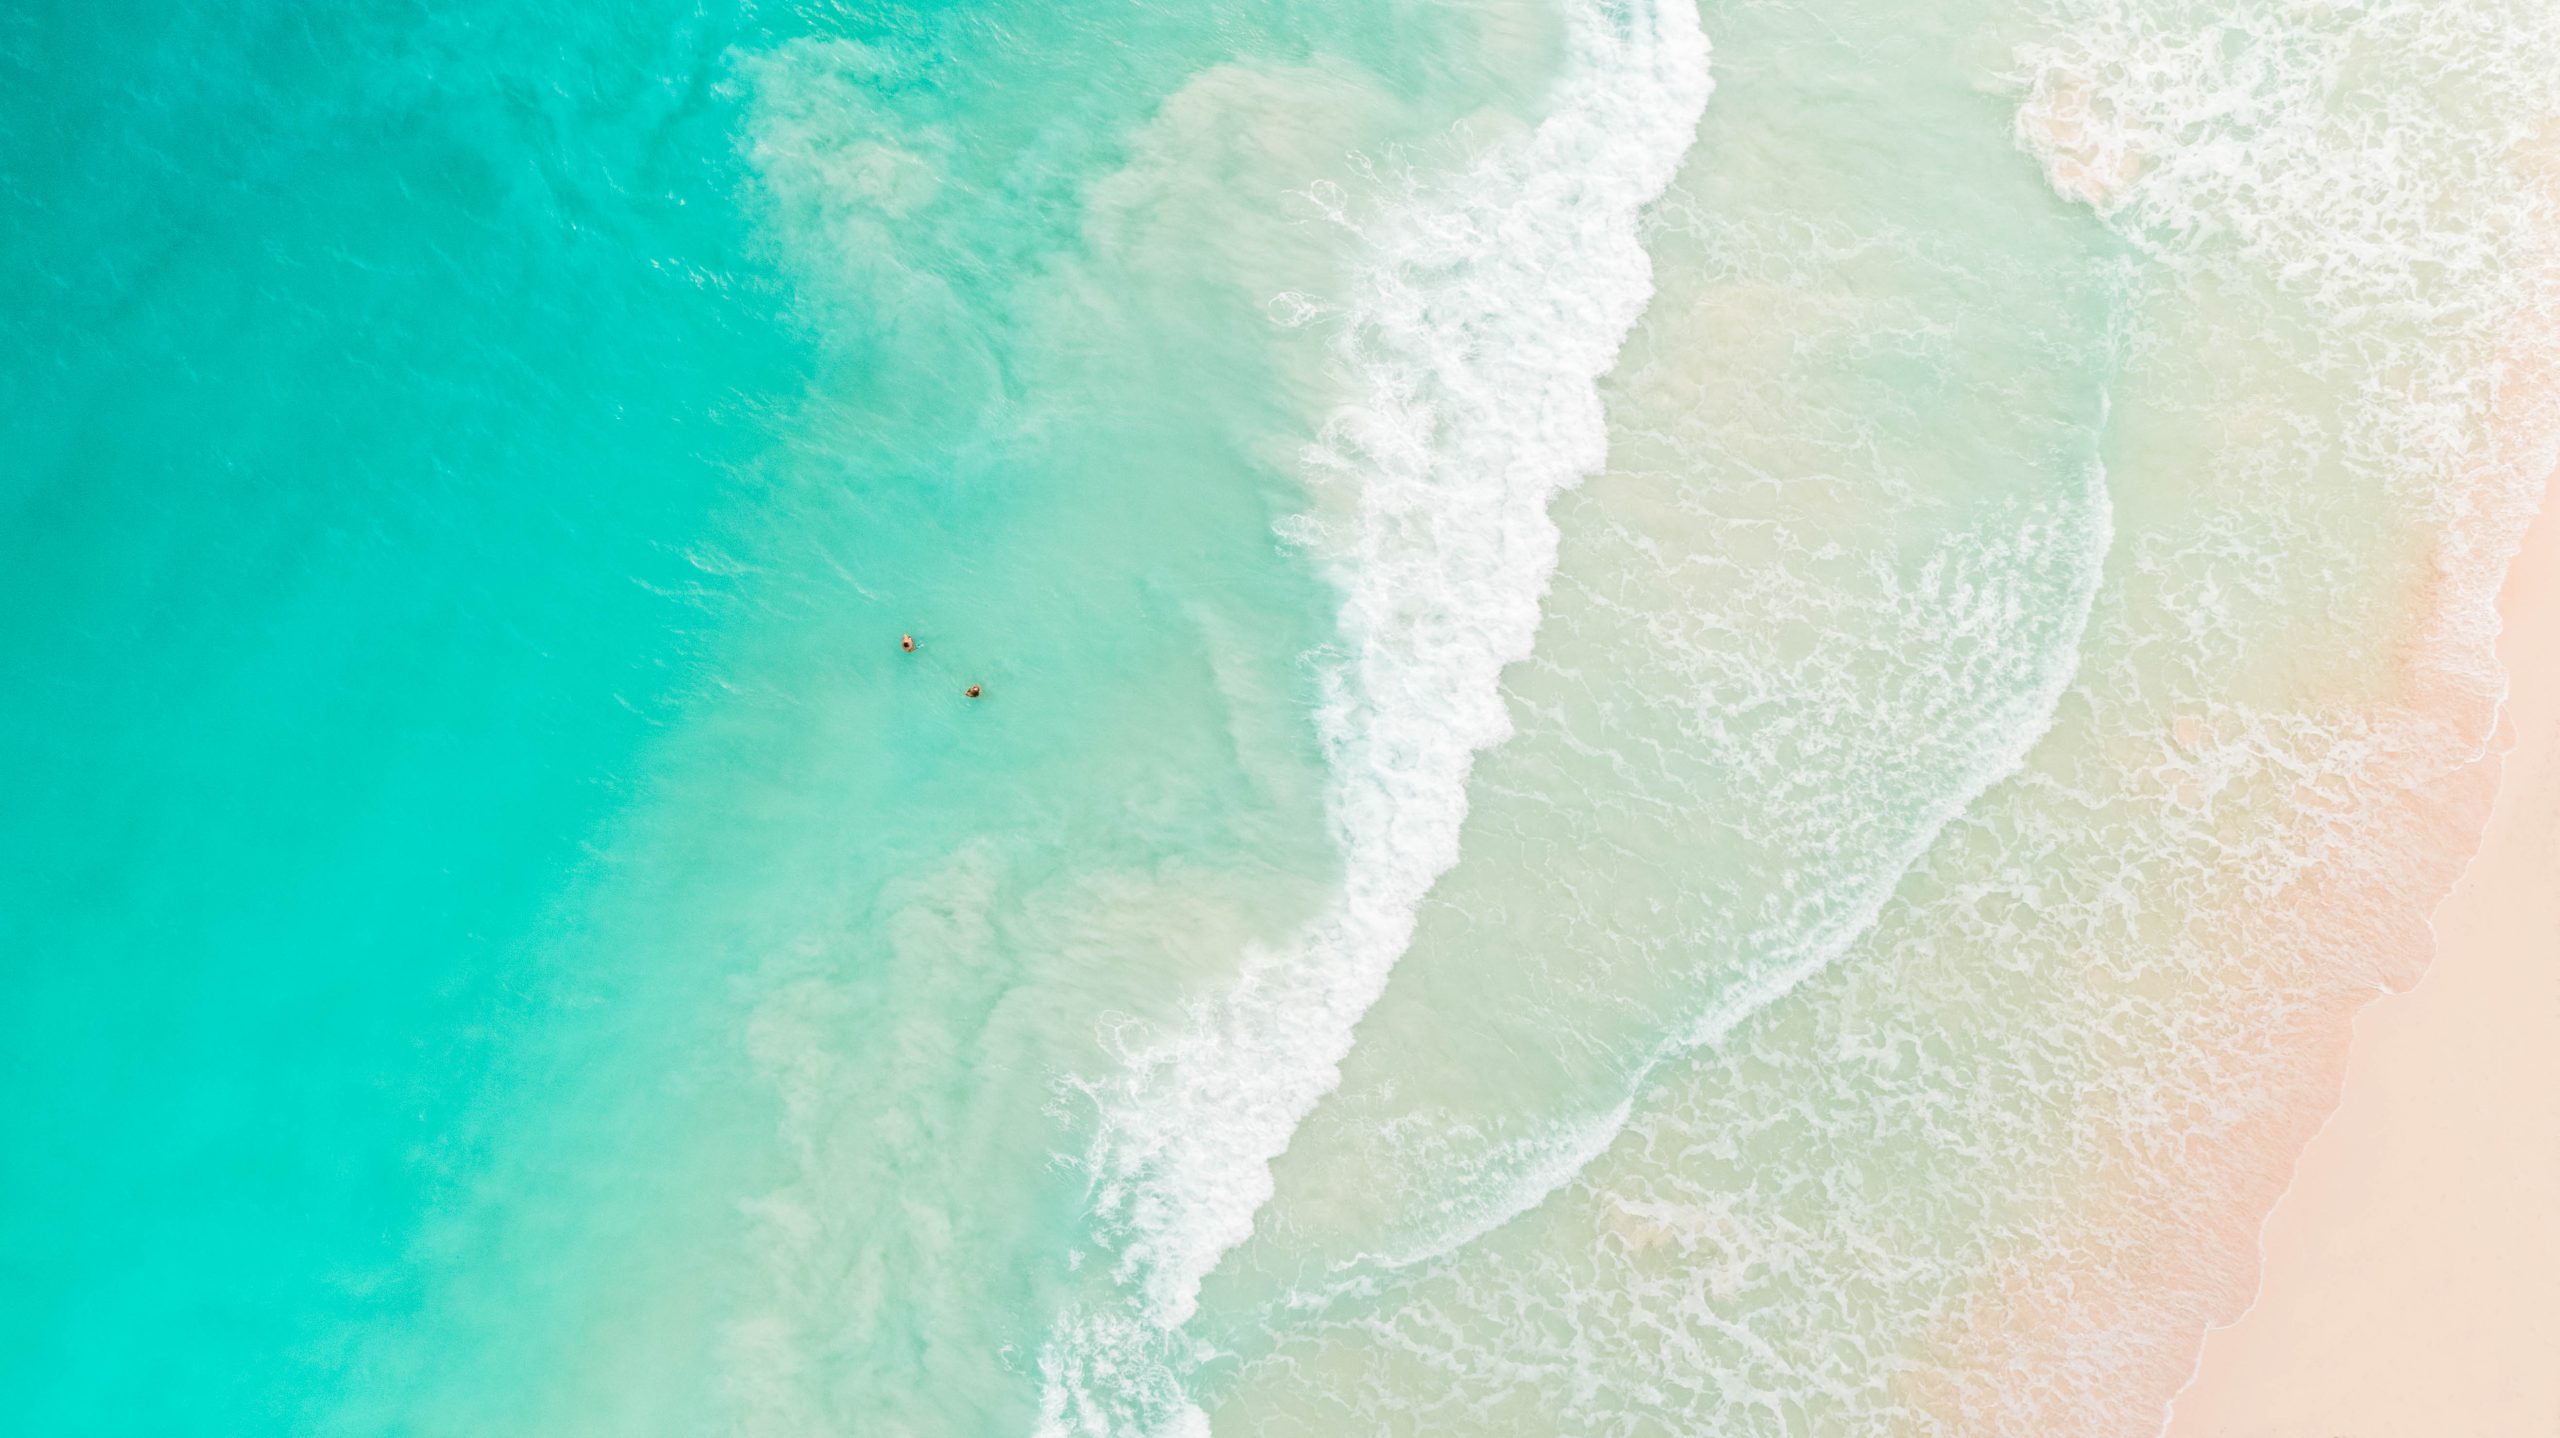 Aerial view of a turquoise ocean meeting a sandy beach, with two people swimming near the shore. Waves are gently breaking onto the beach.